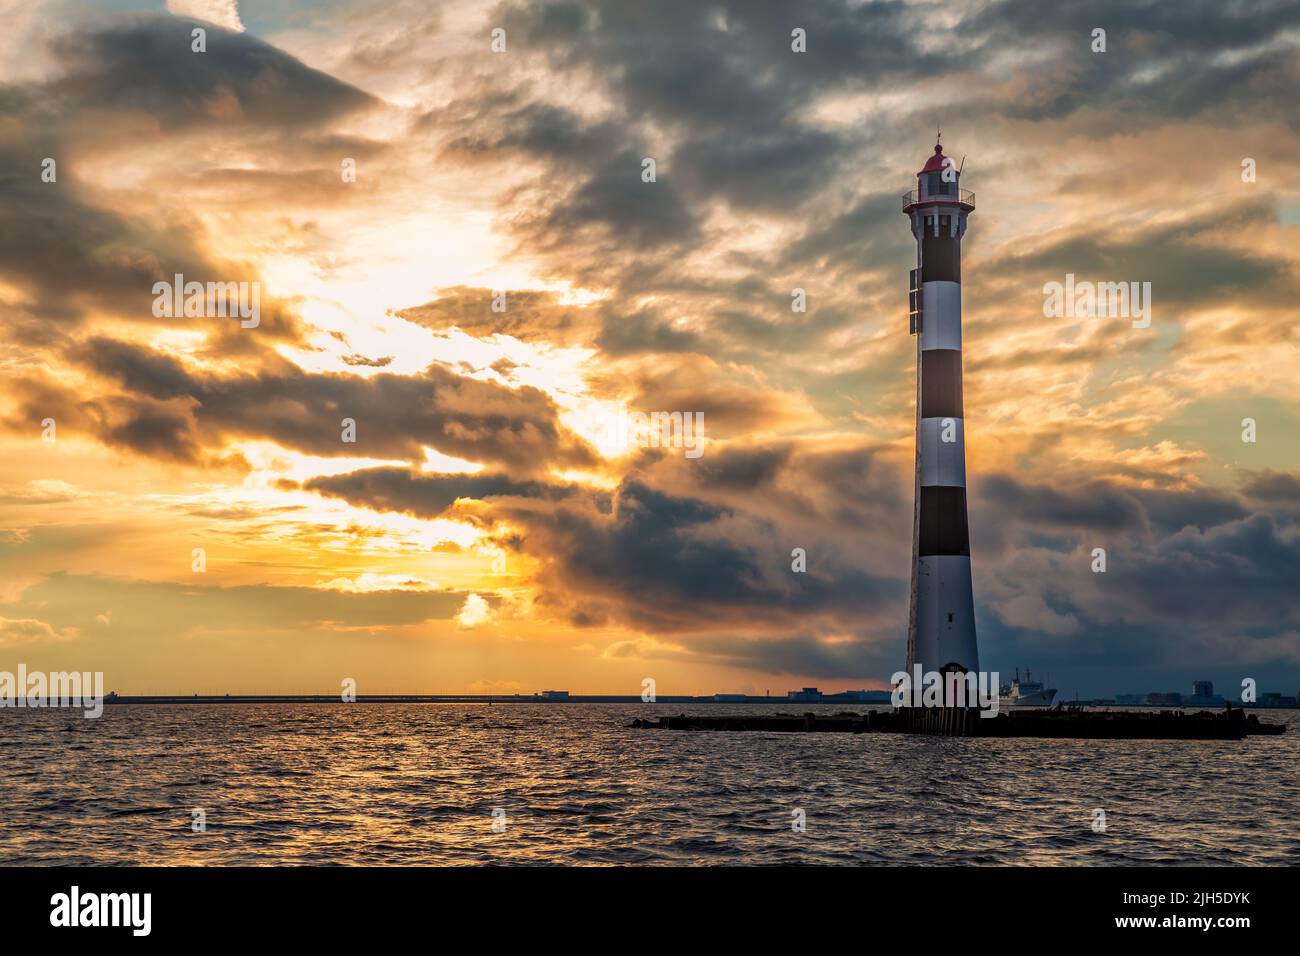 Lighthouse leading lights of the Sea Canal in the Gulf of Finland against the backdrop of a stormy sunset sky. Stock Photo